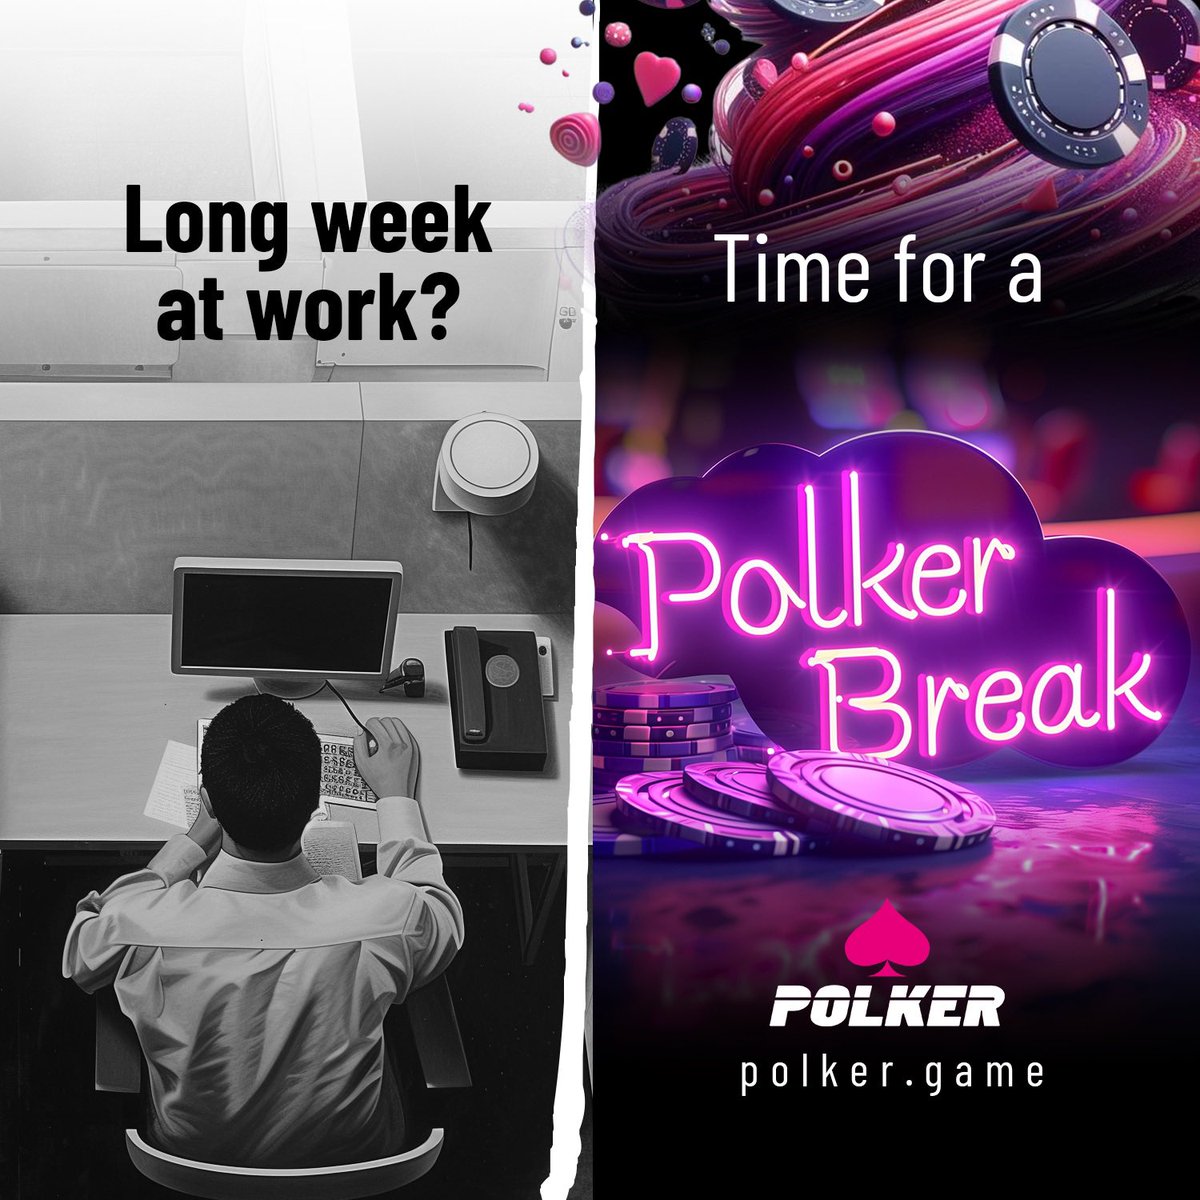 It’s Hump Day! 😵 Break the monotony of the week by playing Polker! 😉 Get a head start earning play chips, accessories, and NFTs with our PC game available on Epic Games! 😎 Then keep an eye out on the Android release next quarter! 👀 #gamefi #playtoearn #Wednesday